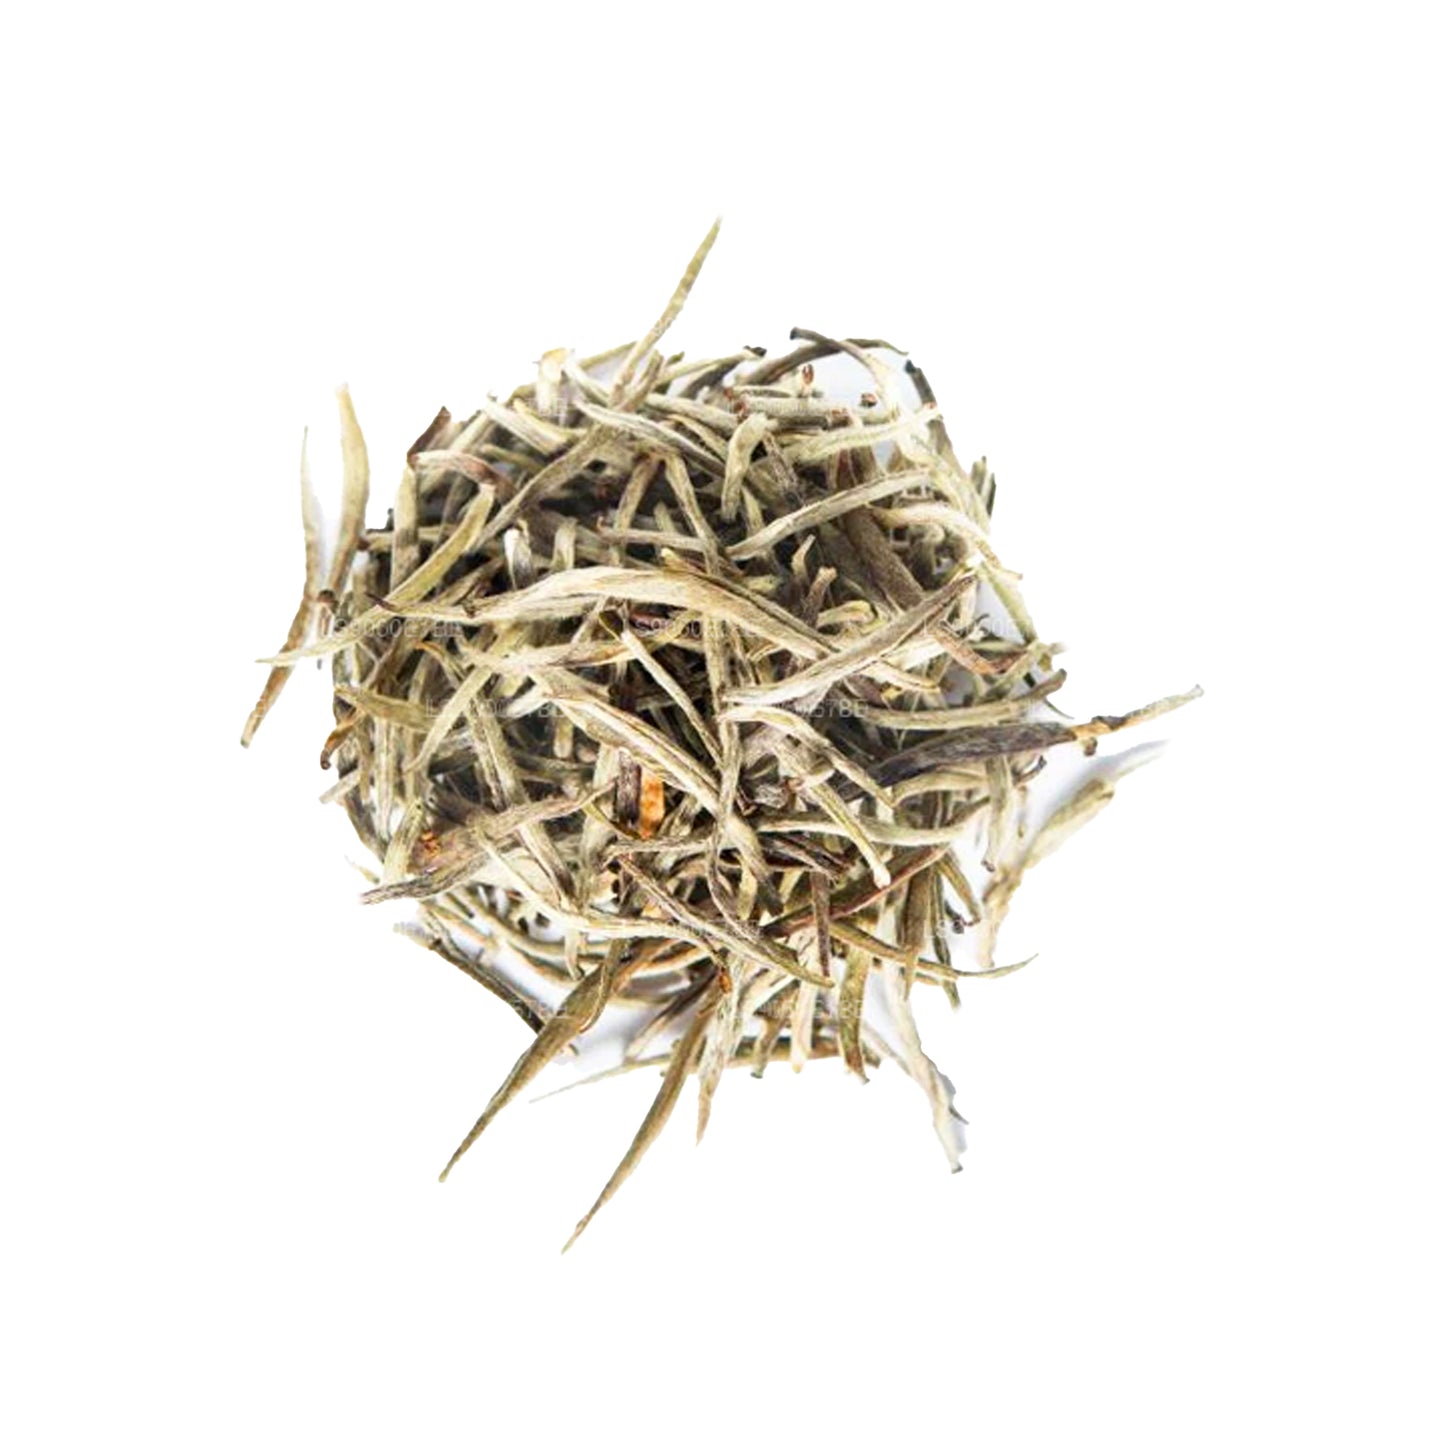 Dilmah Ceylon Silver Tips witte thee (40 g) Caddy Loose Tea